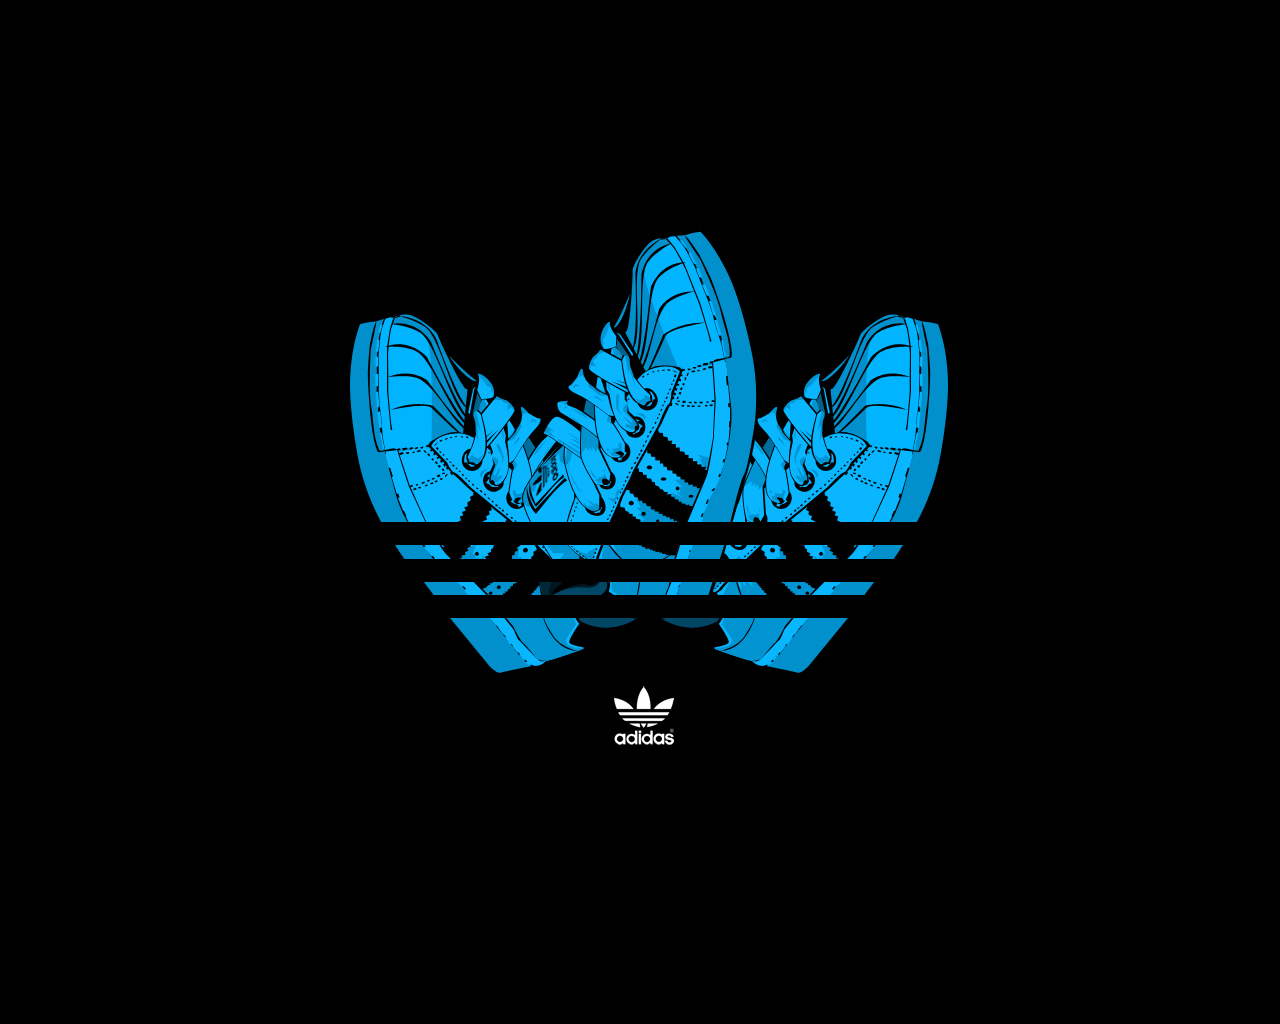 Adidas Logo With Shoes Black Background HD Wallpaper Image